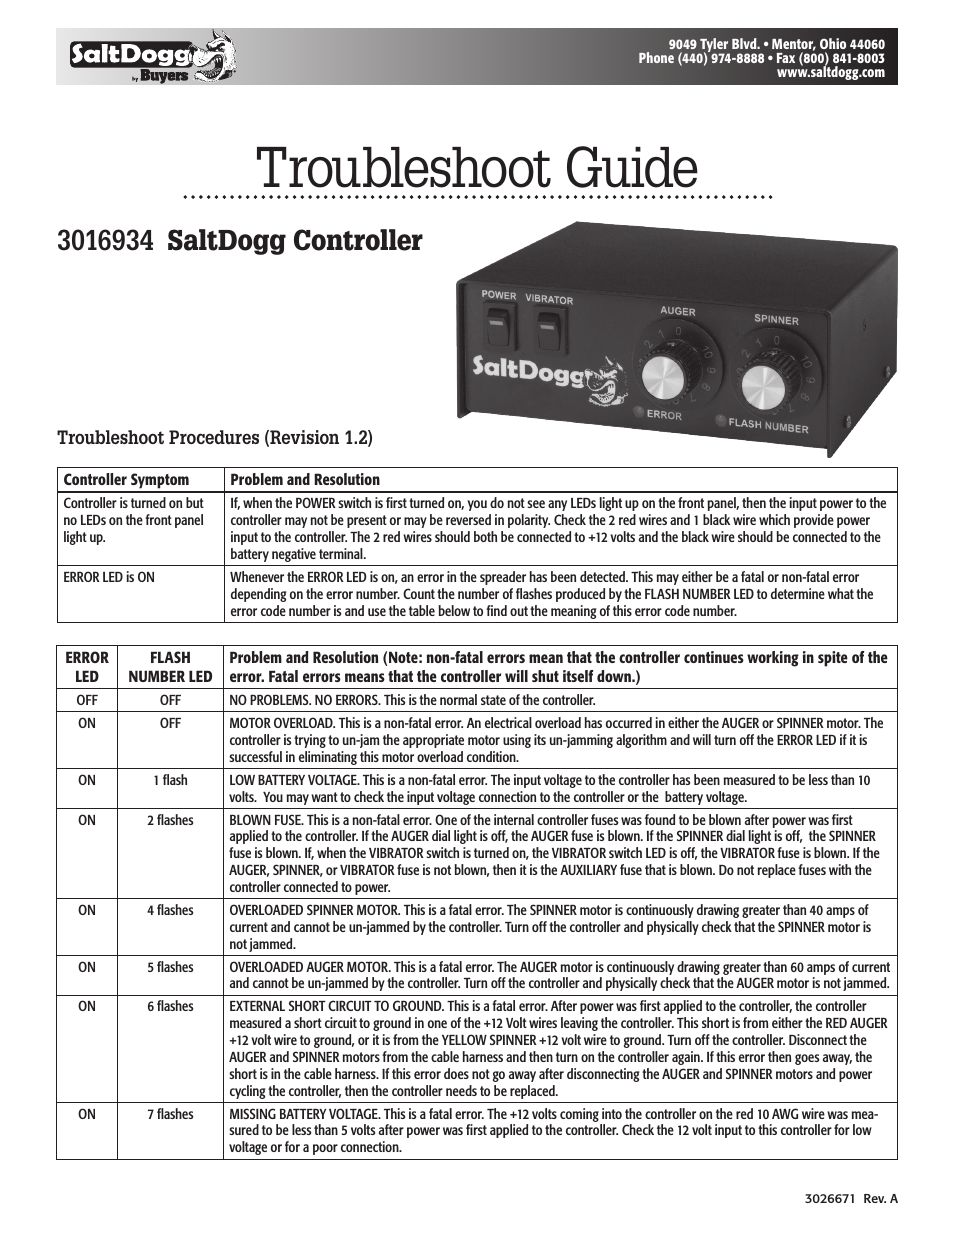 Controller (3016934) Troubleshoot Guide - 92441SSA, 9035000, 1400465SSE